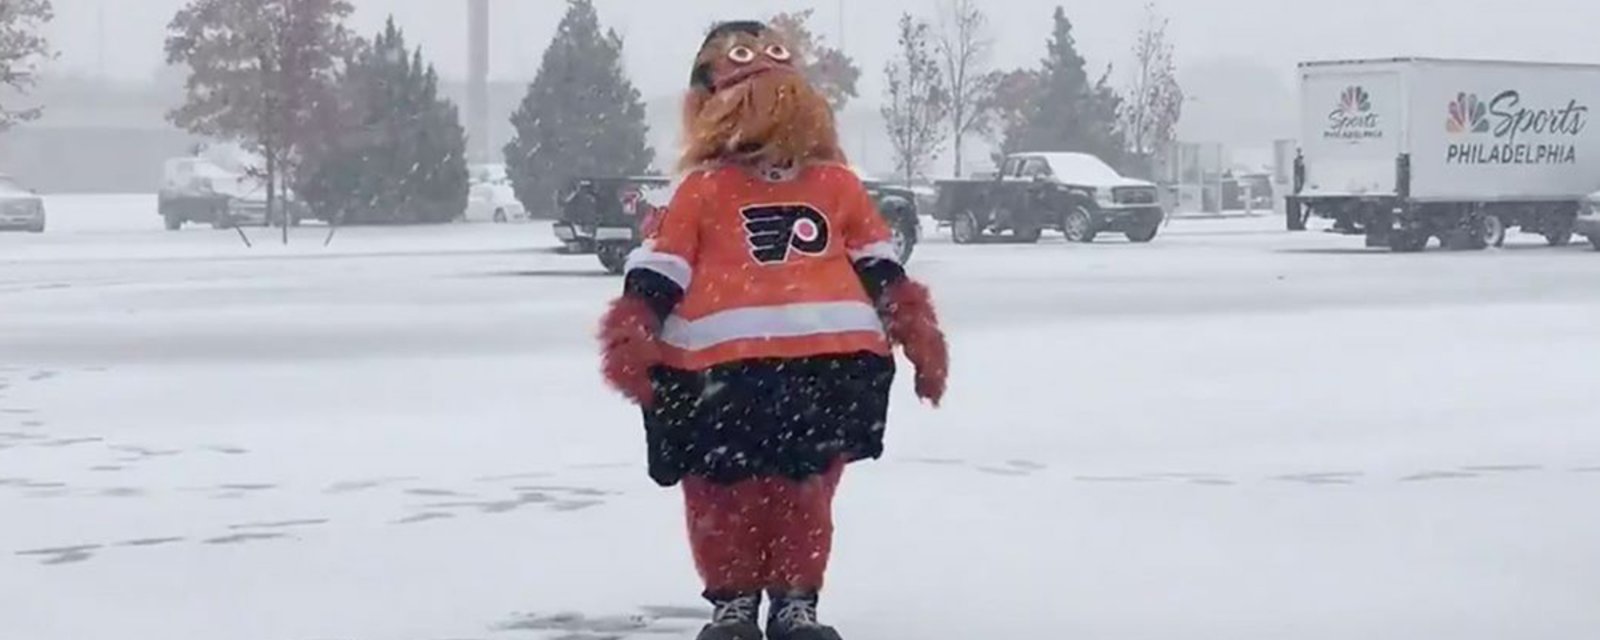 Flyers mascot discovers snow for the first time, chirps rival NHL mascot